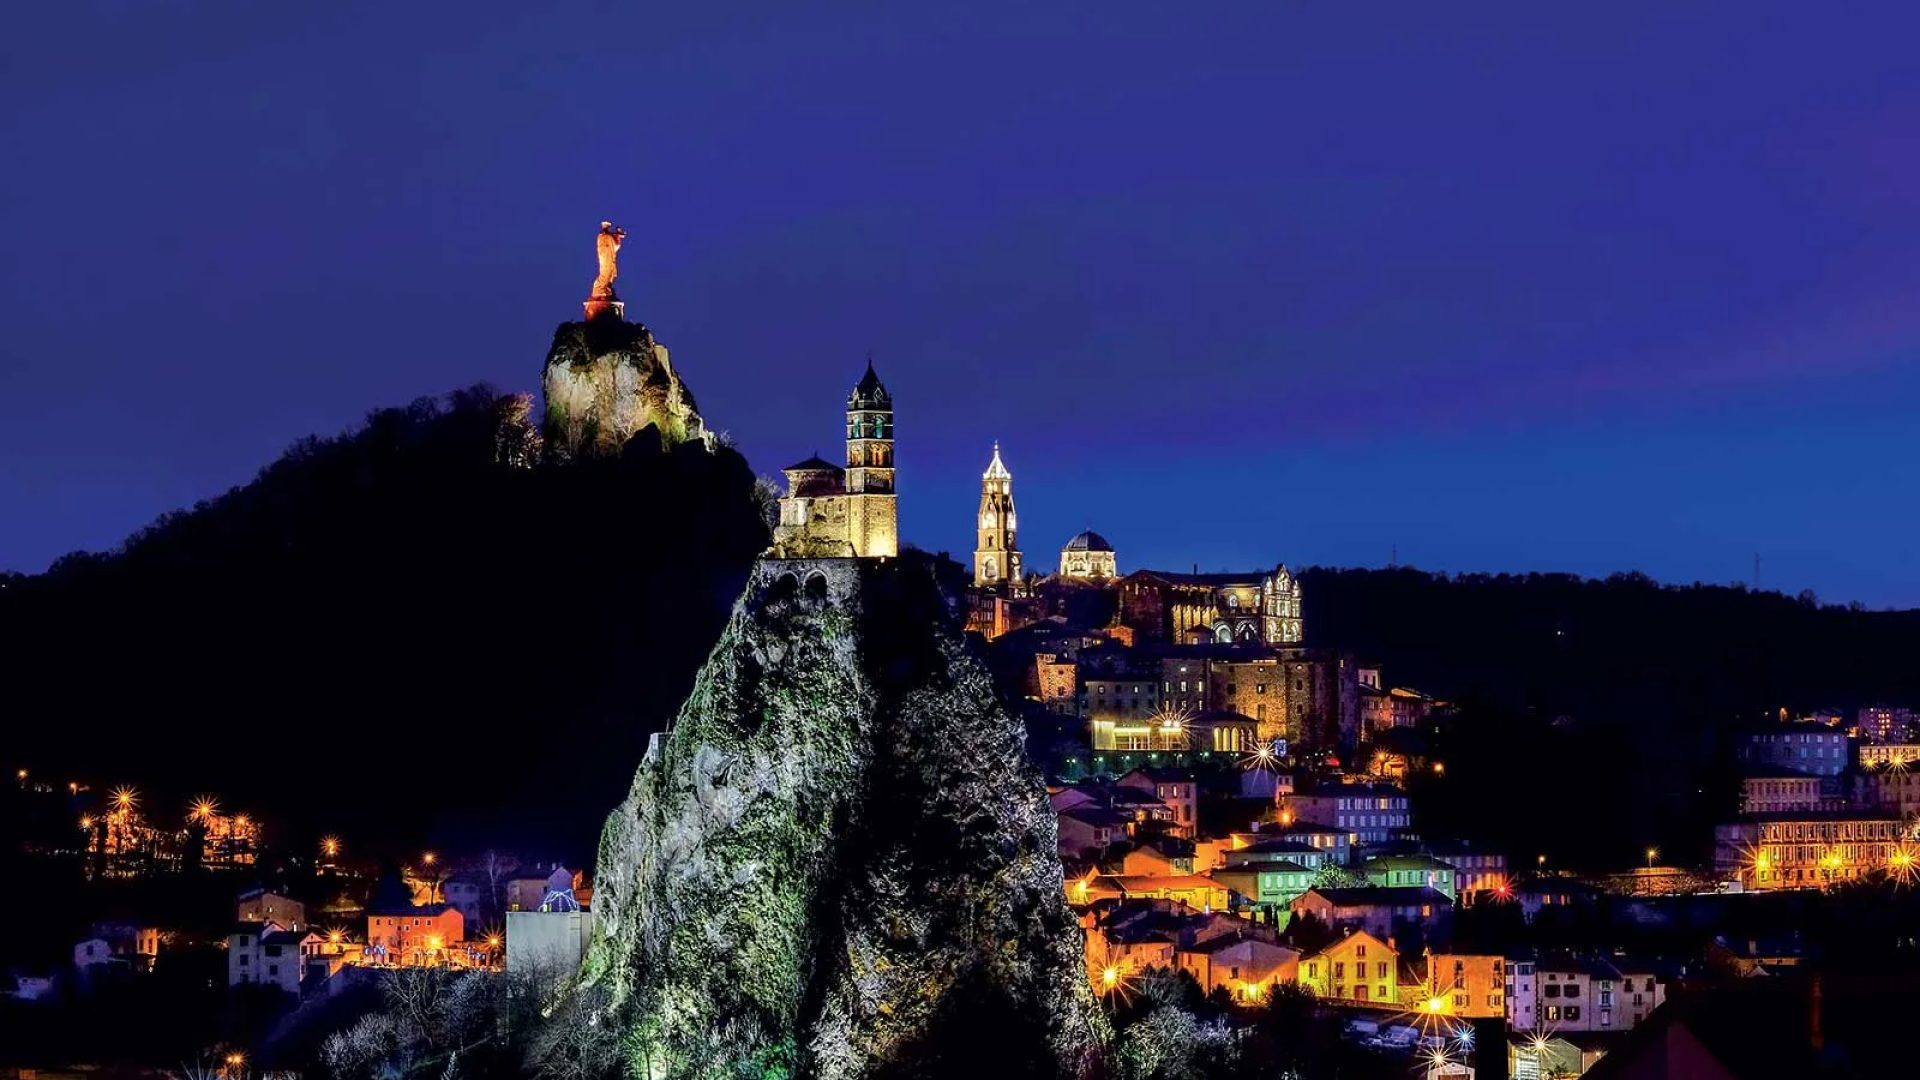 Night view of the Rocher Saint-Michel, the Notre-Dame de France statue and the town of Puy-en-Velay